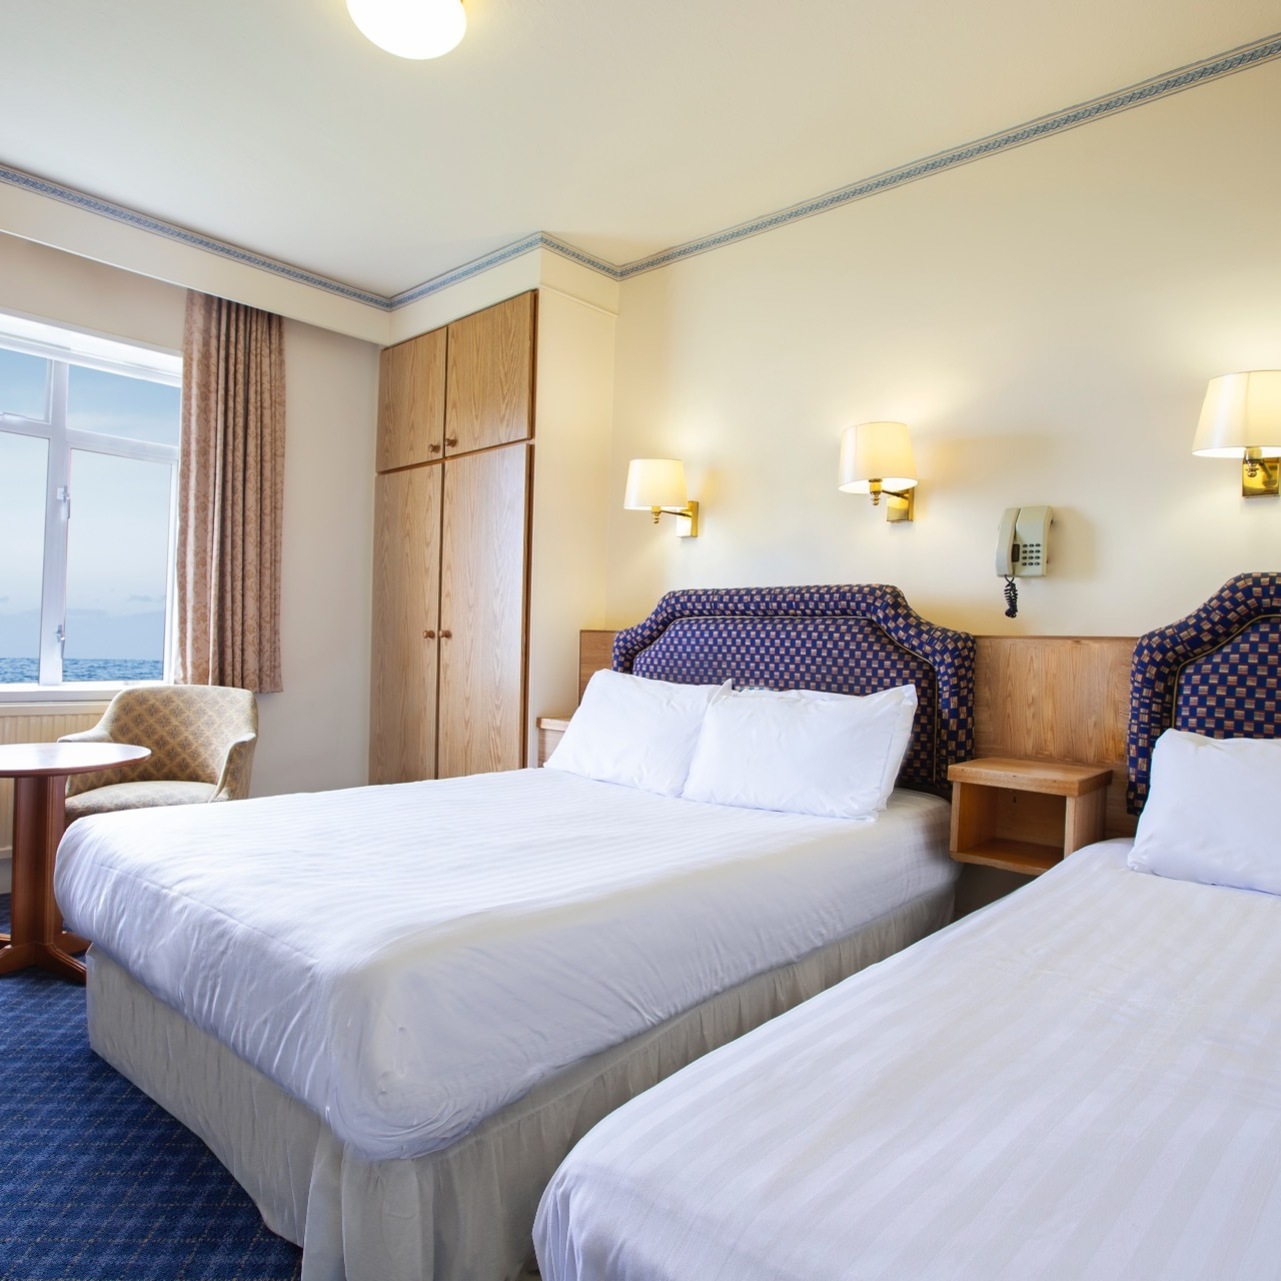 Double room with sea view at the Livermead Cliff Hotel